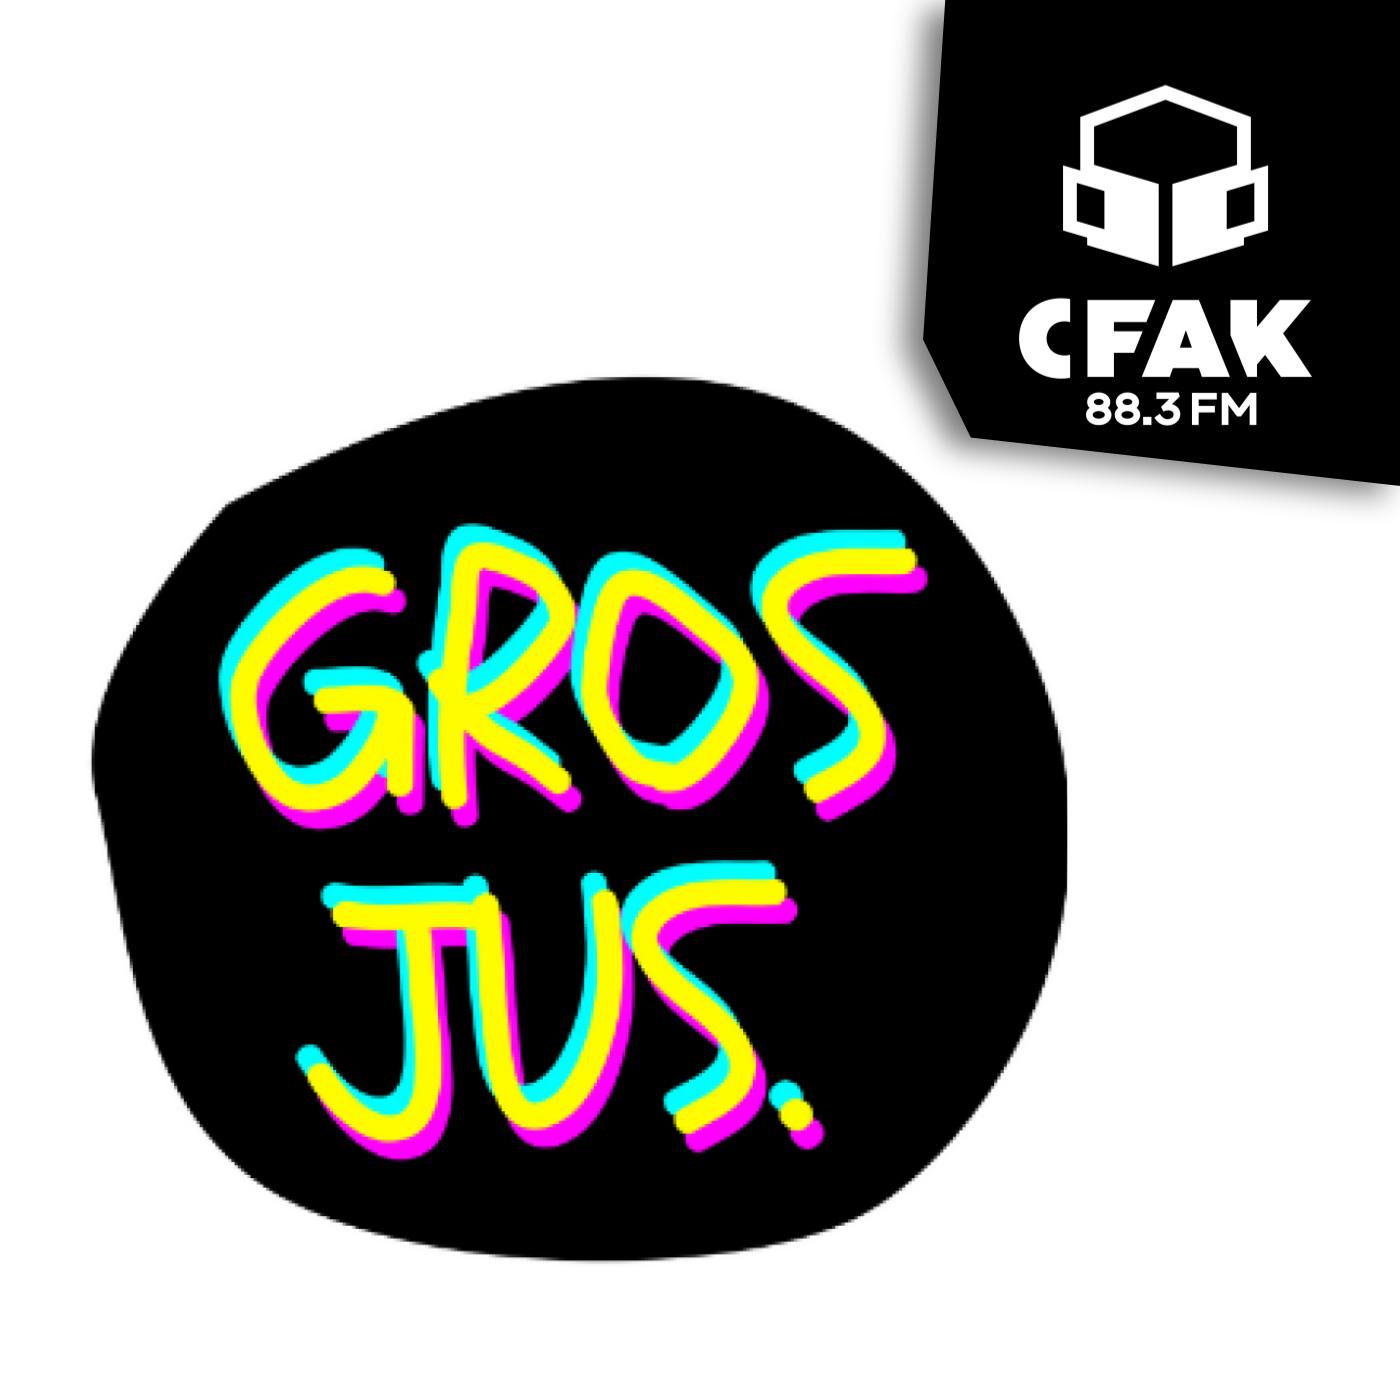 Gros Jus - 7 avril 2022